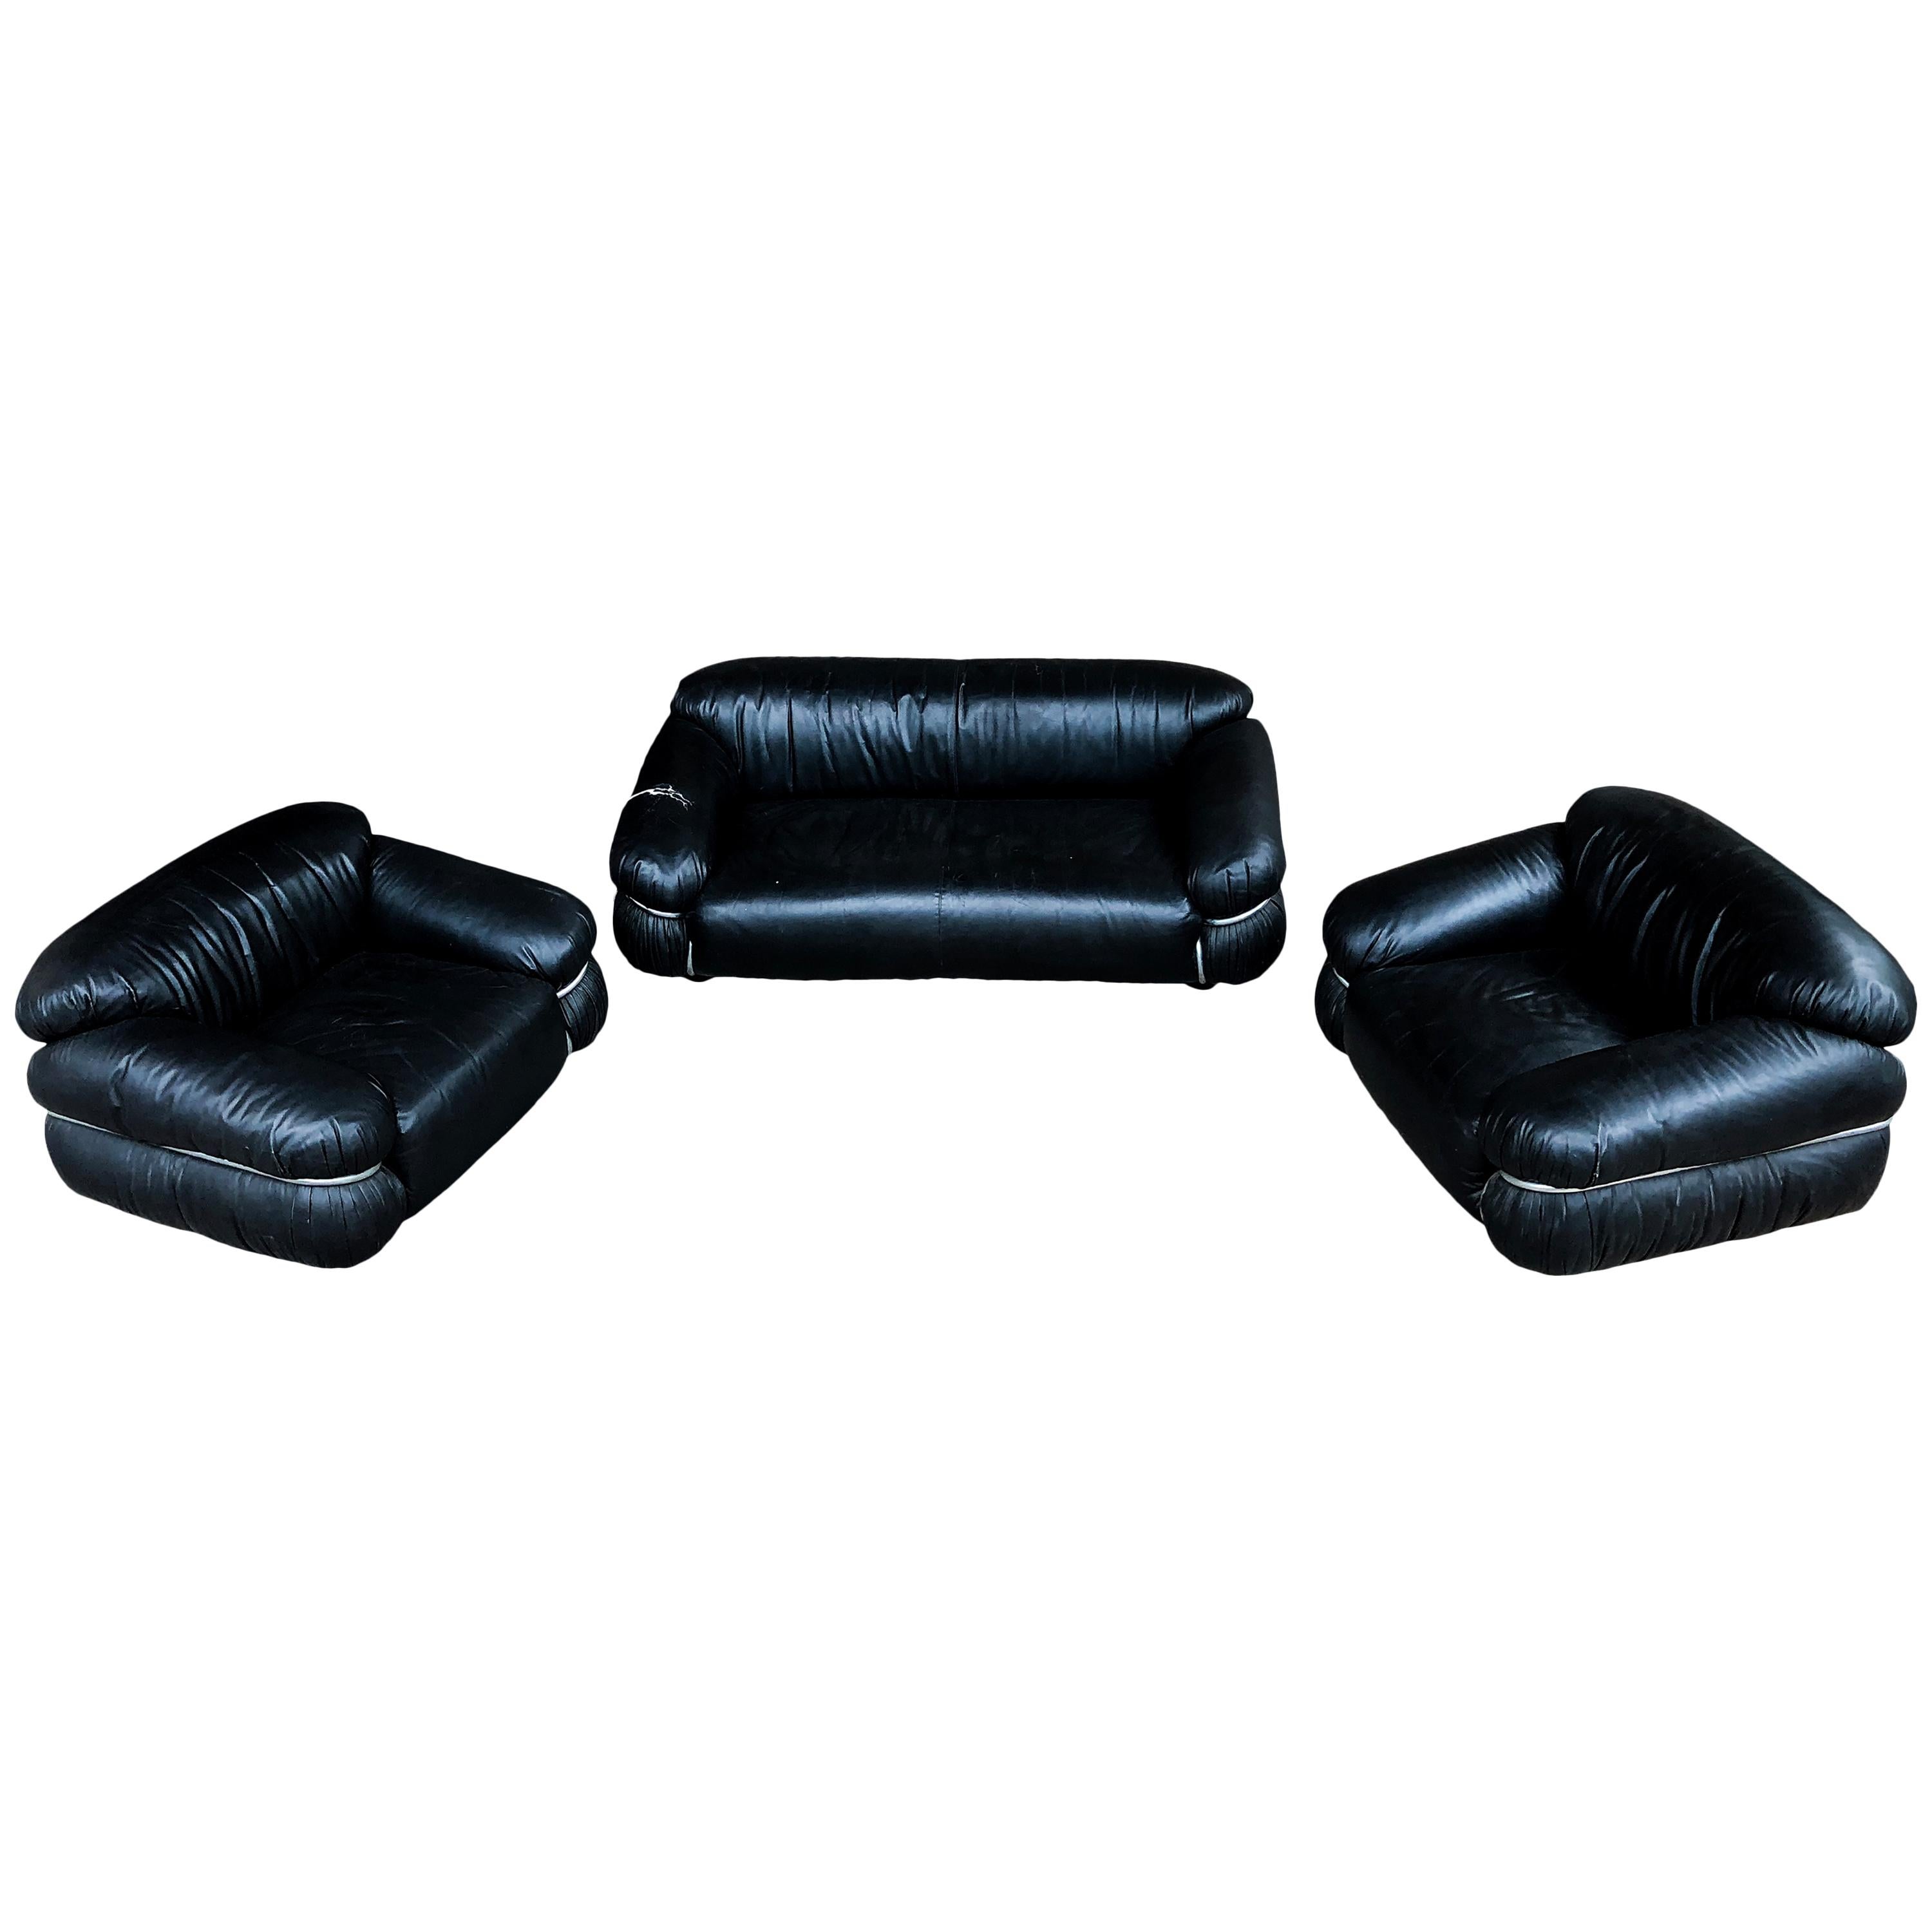 Gianfranco Frattini Black Leather Sesann Living Room Set for Cassina, 1972 In Good Condition For Sale In Vicenza, IT